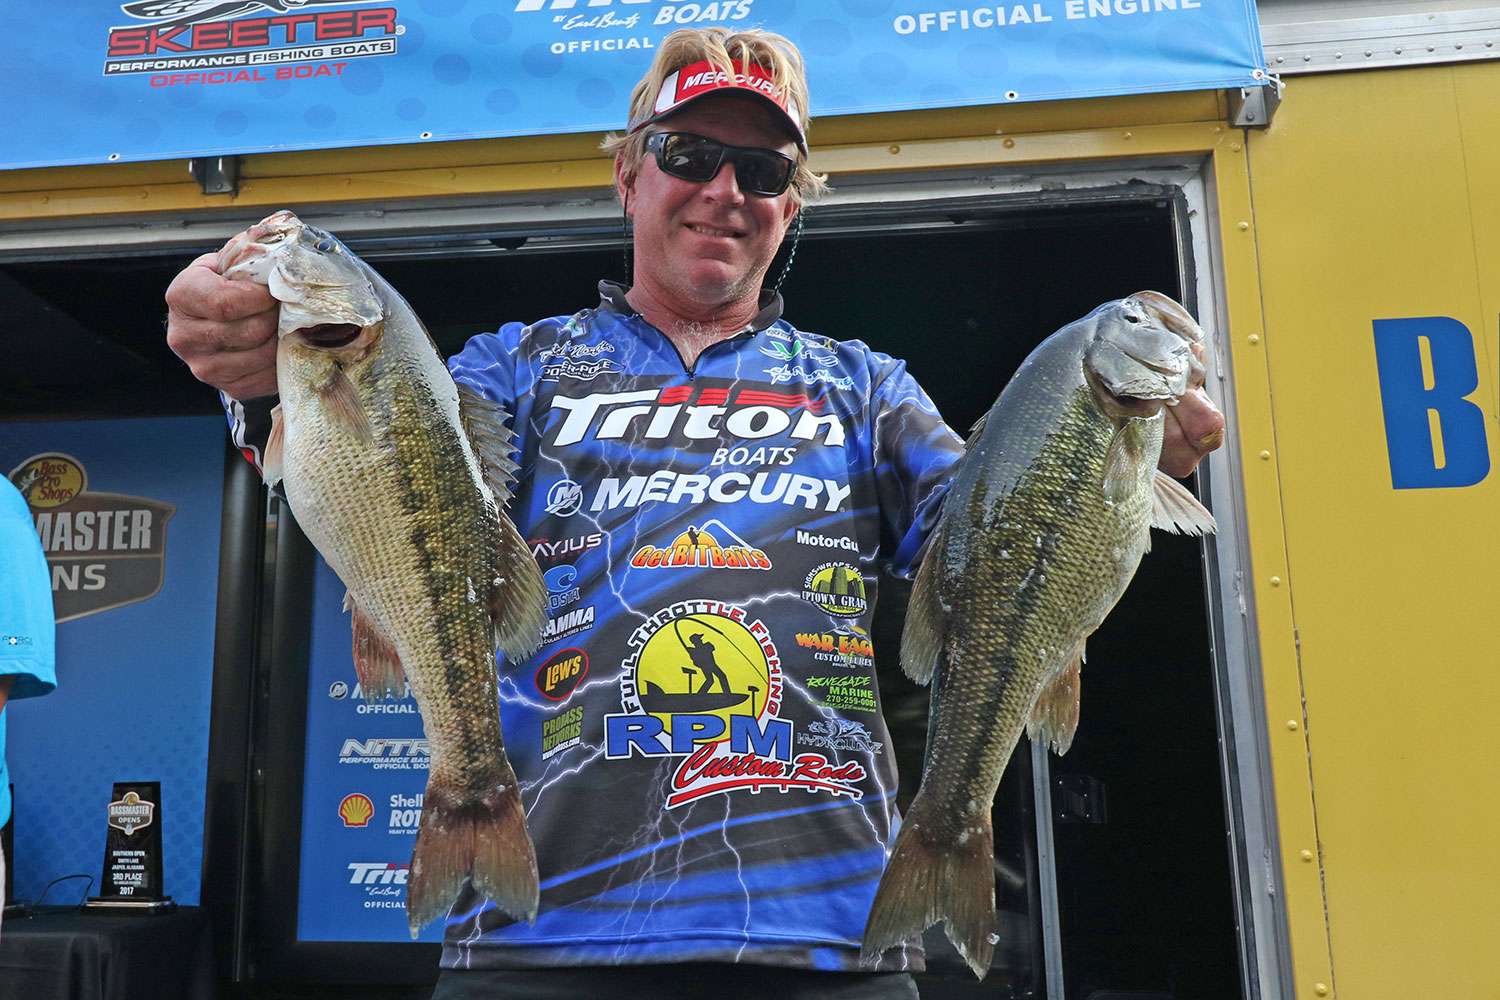 Rick Morris finished second, and also earned a 2018 Bassmaster Elite Series spot with a three-day total of 34-14.